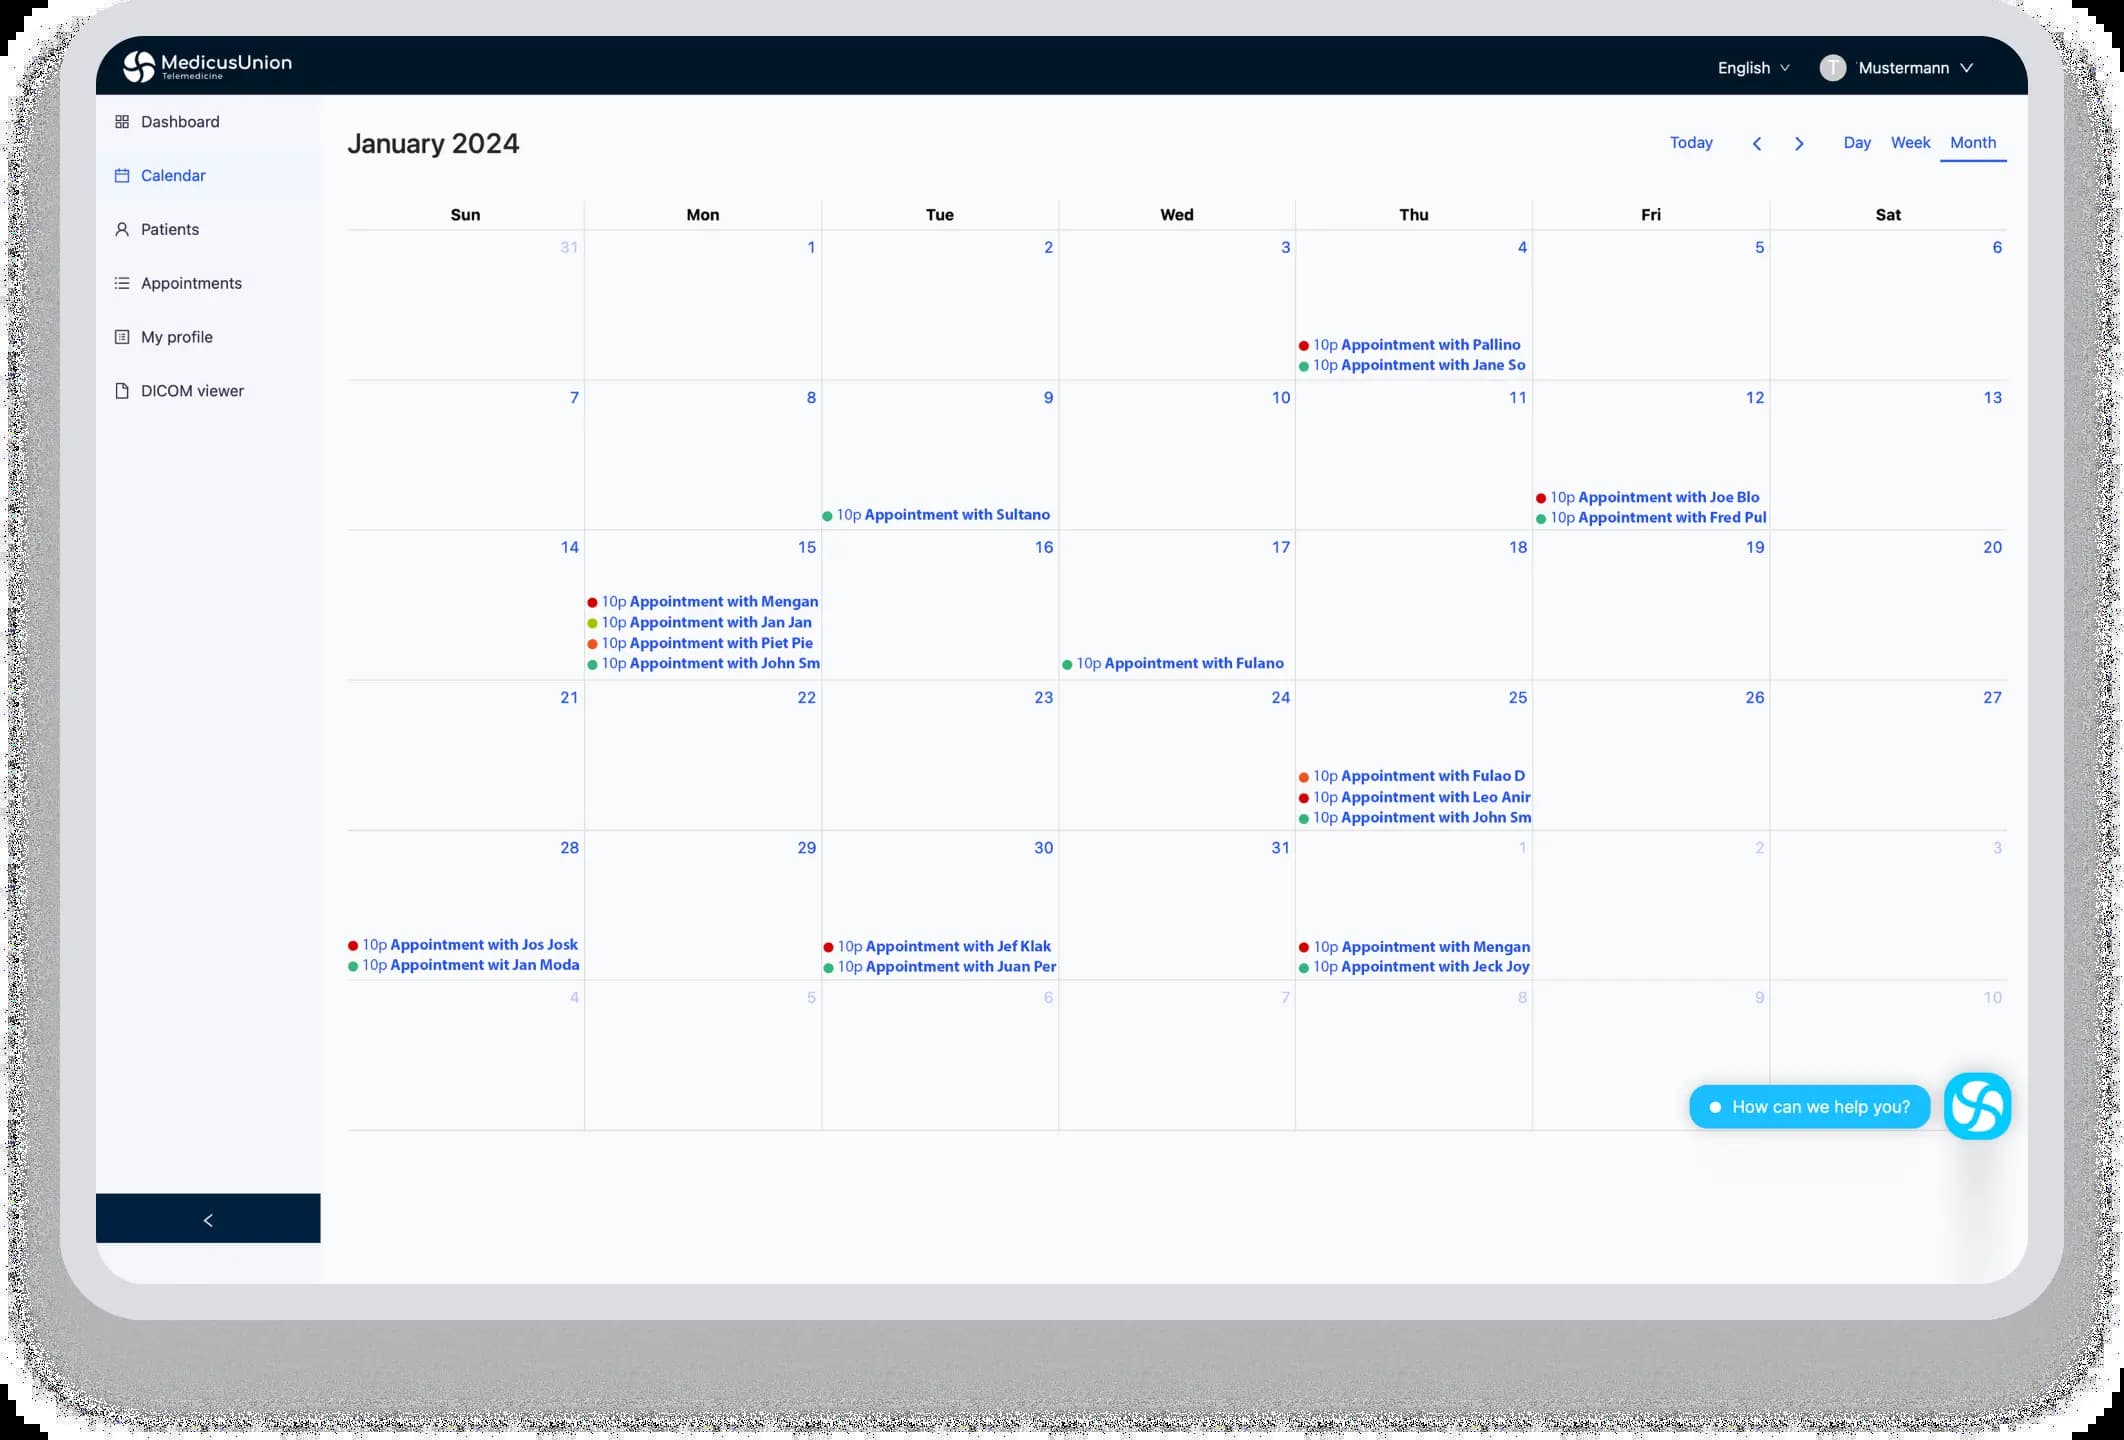 A scheduler interface for easy scheduling, designed for telemedicine appointments.